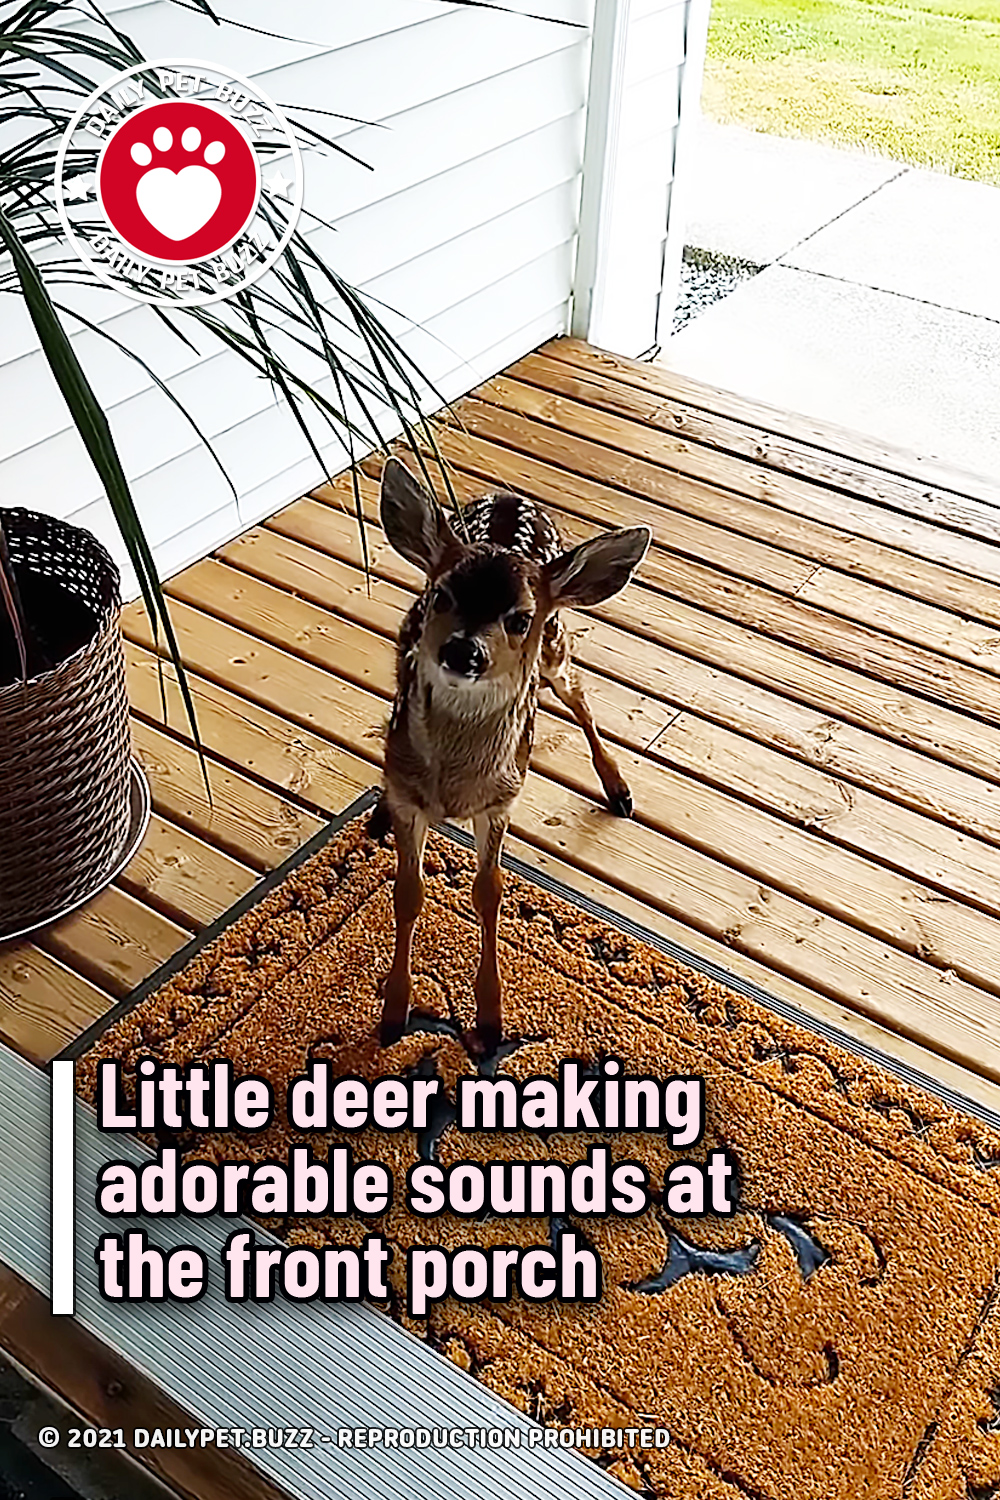 Little deer making adorable sounds at the front porch